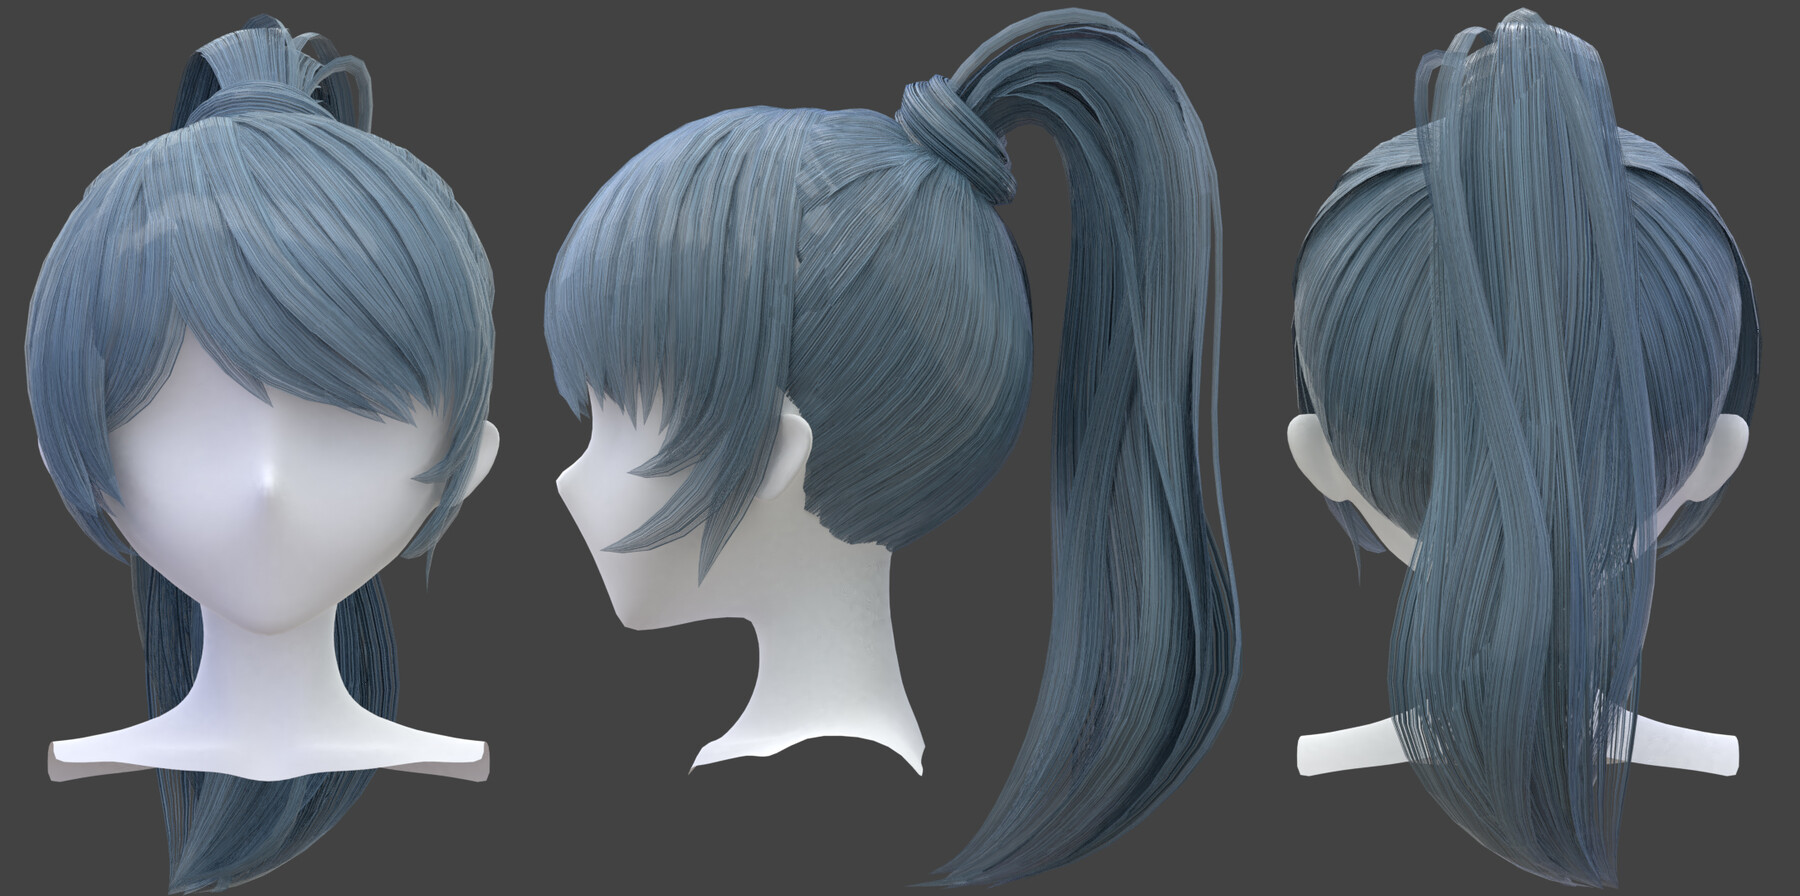 Anime Hairstyles Pack 9 types of hairstyles 3D model